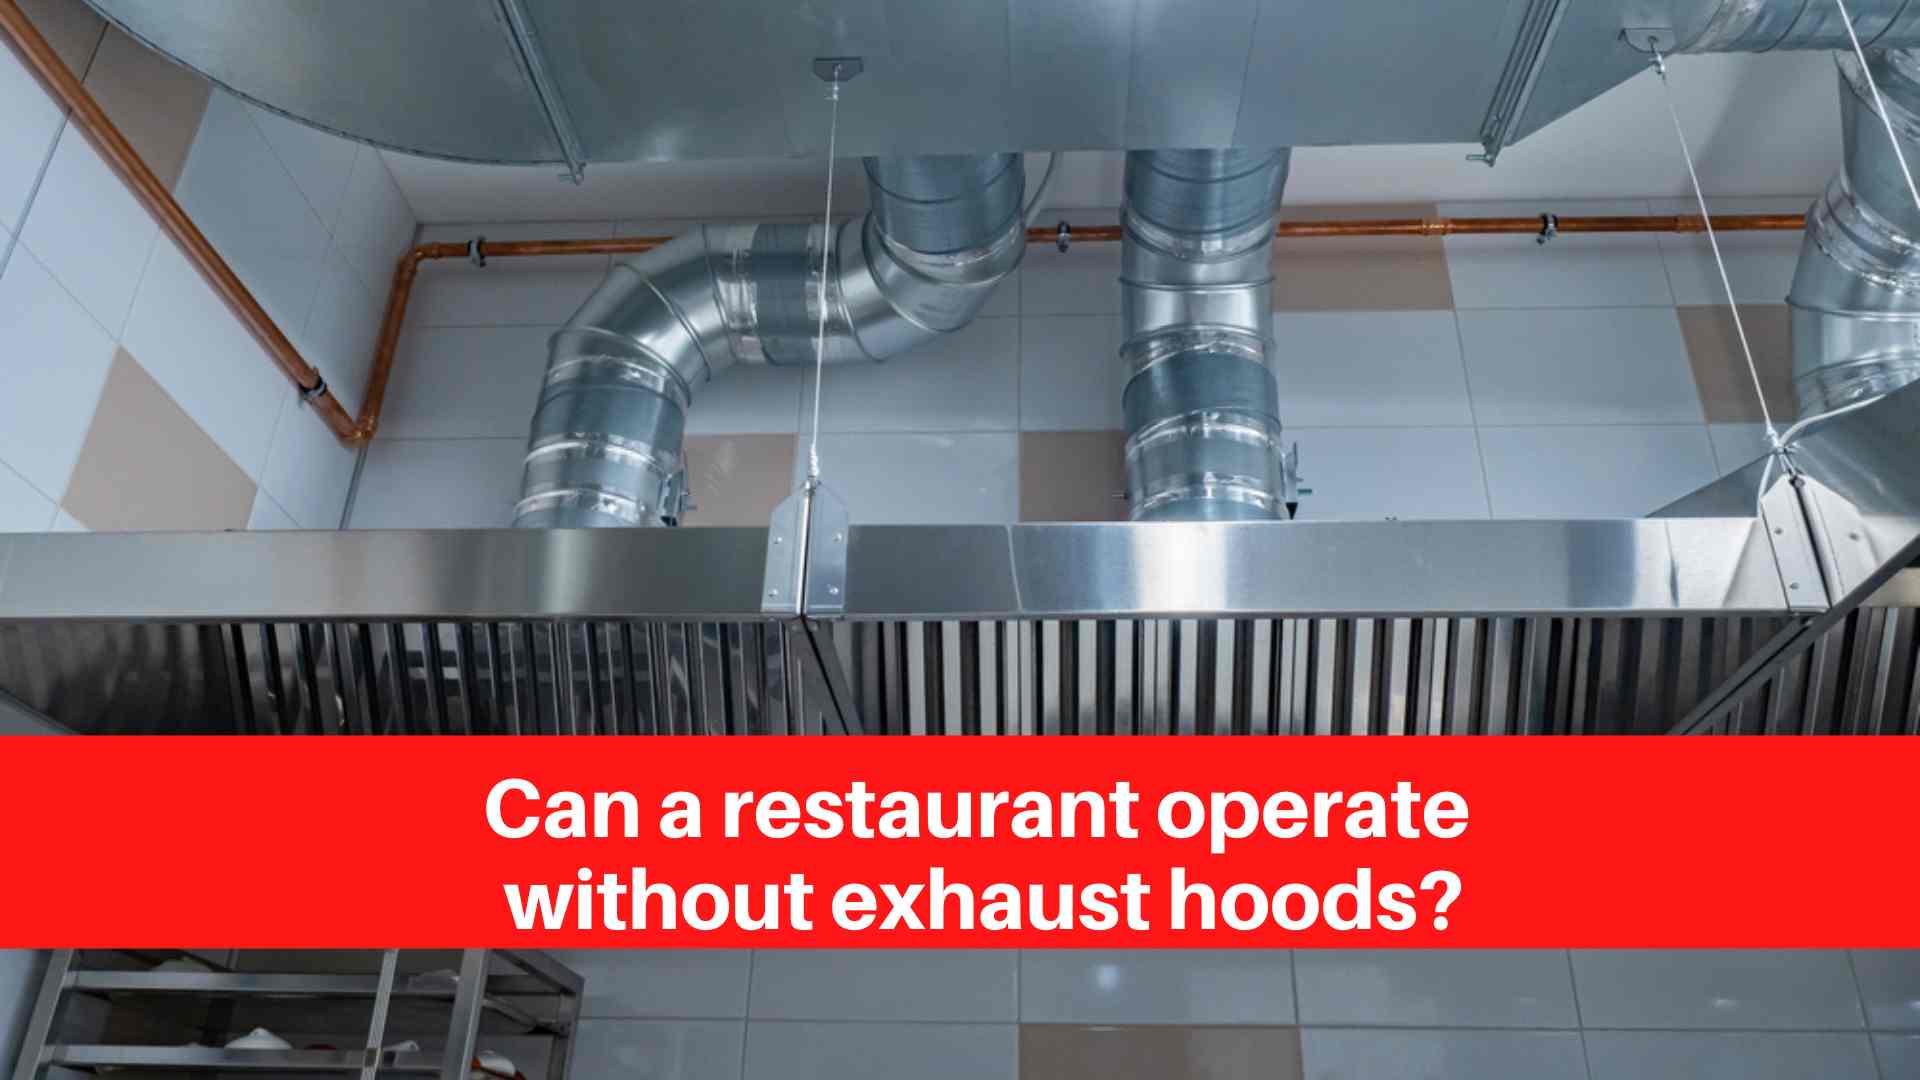 Can a restaurant operate without exhaust hoods